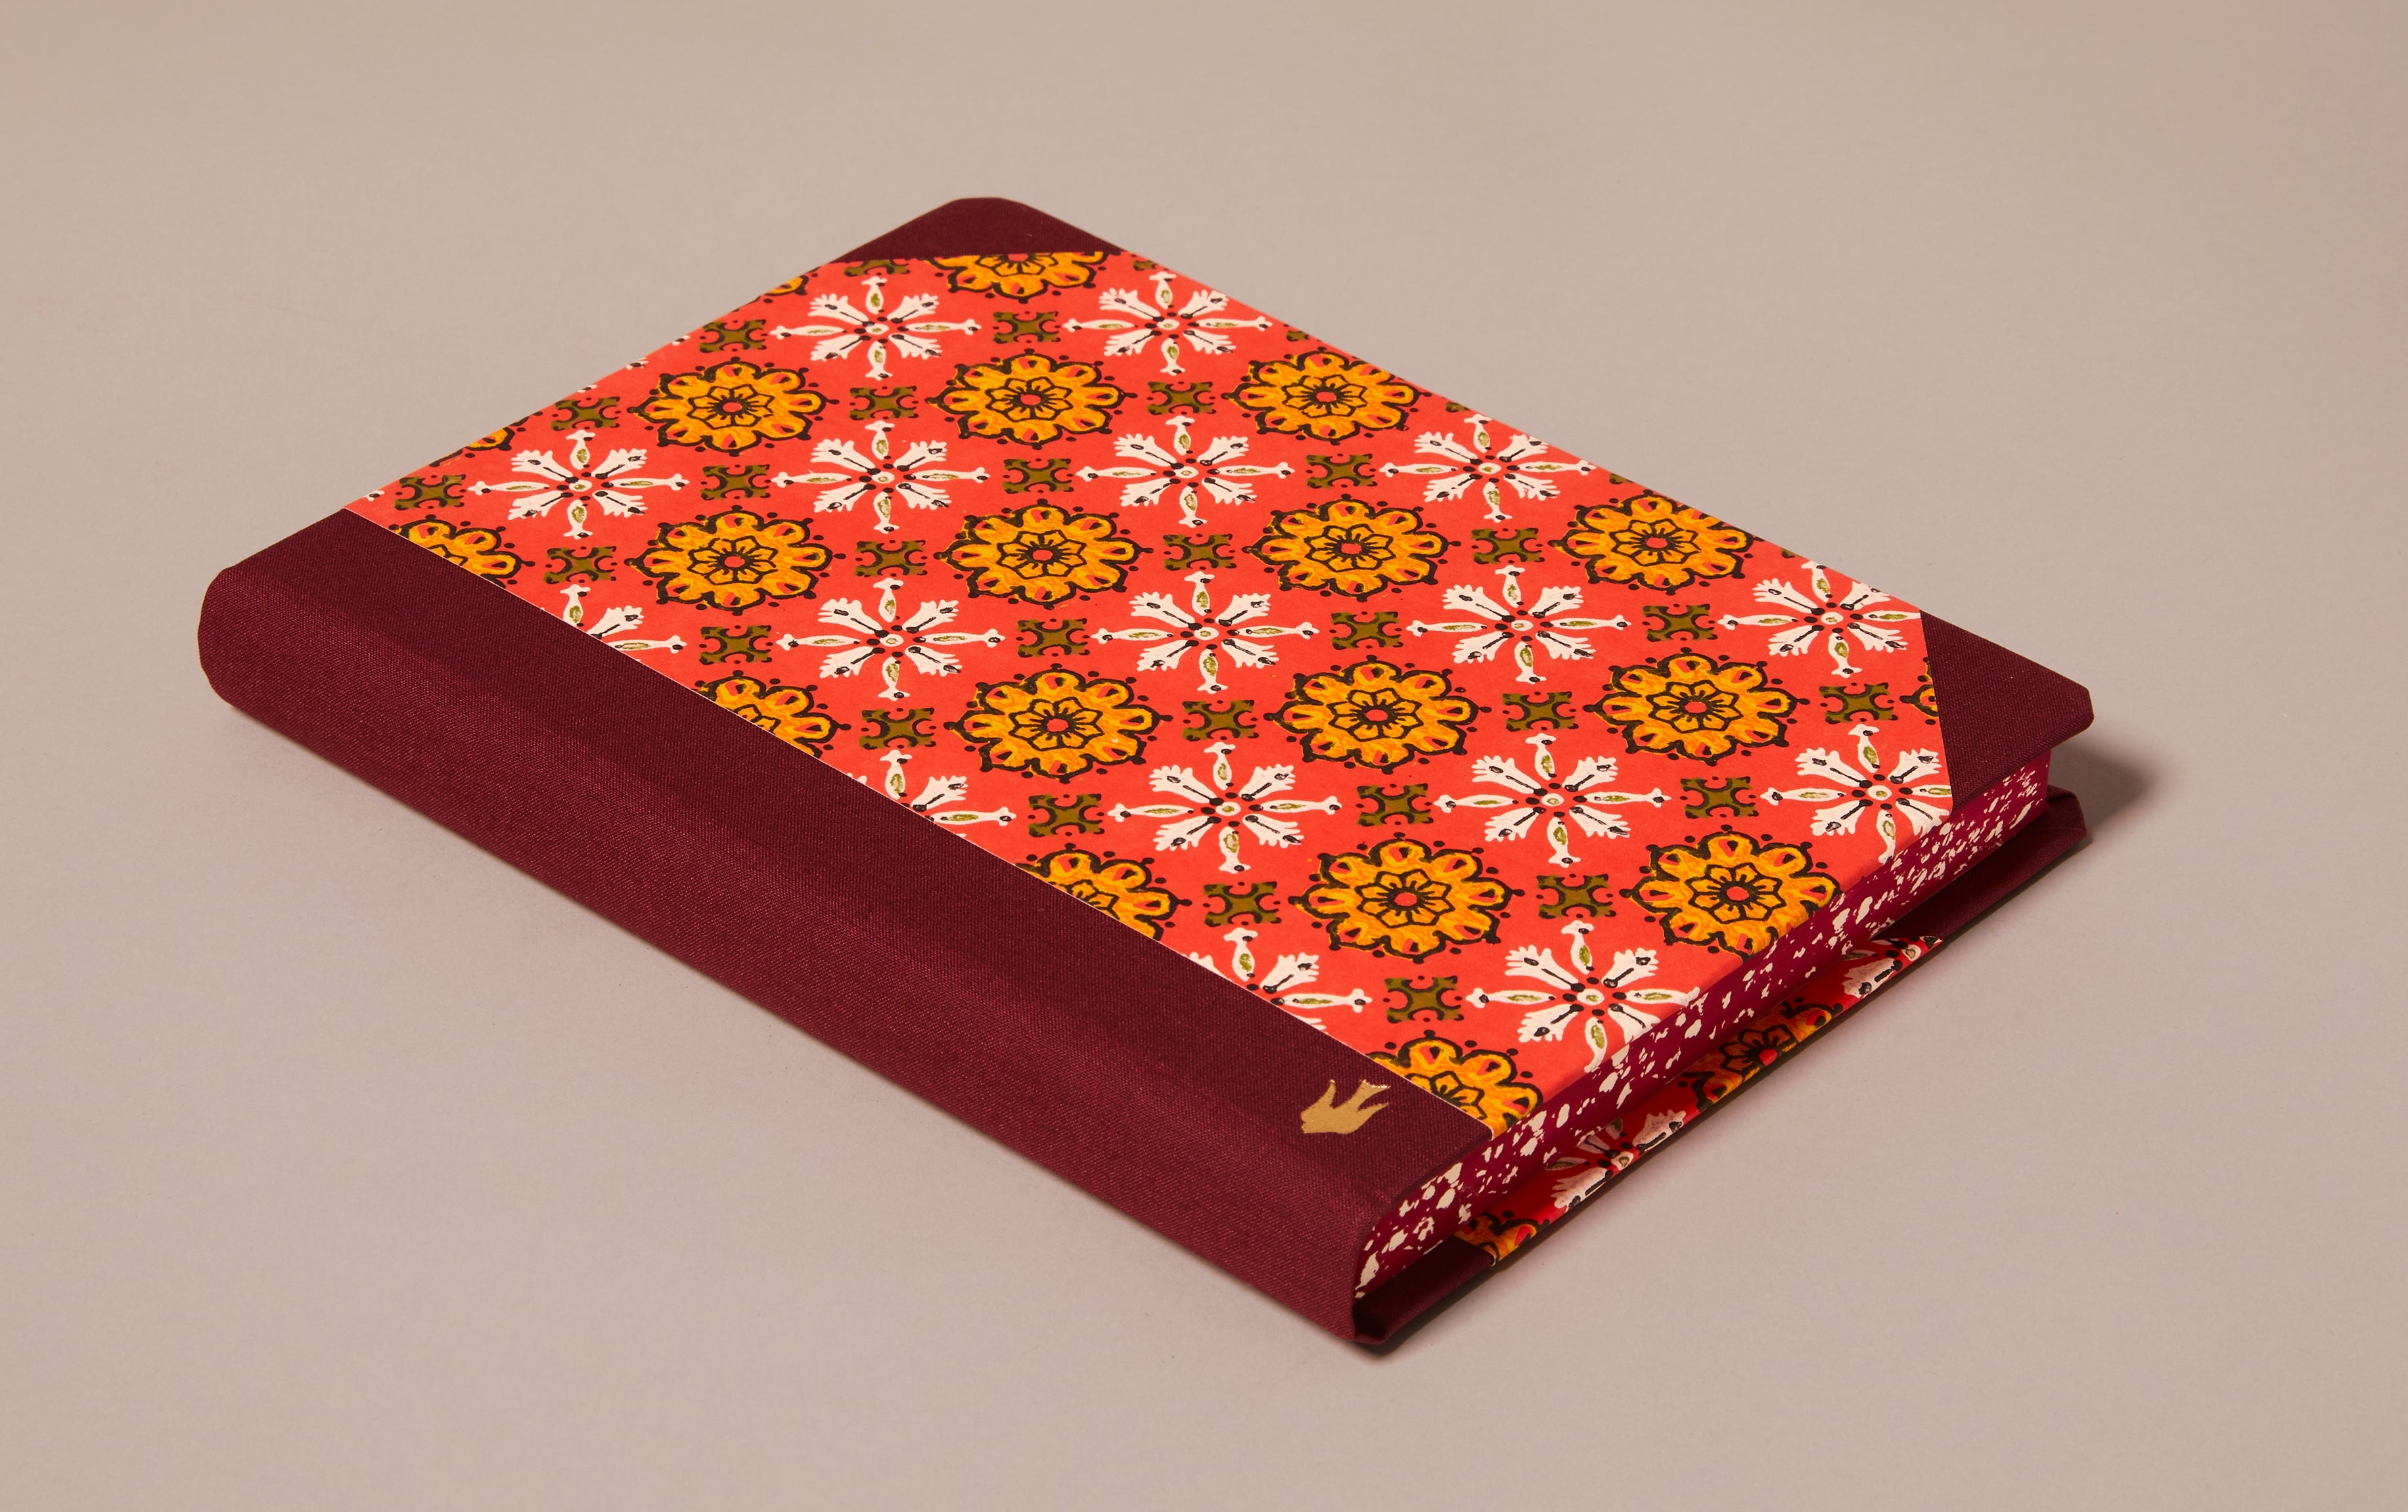 Extra-Thick "Composition Ledger" Wallpaper Collection Notebook, Strawberry Chevron